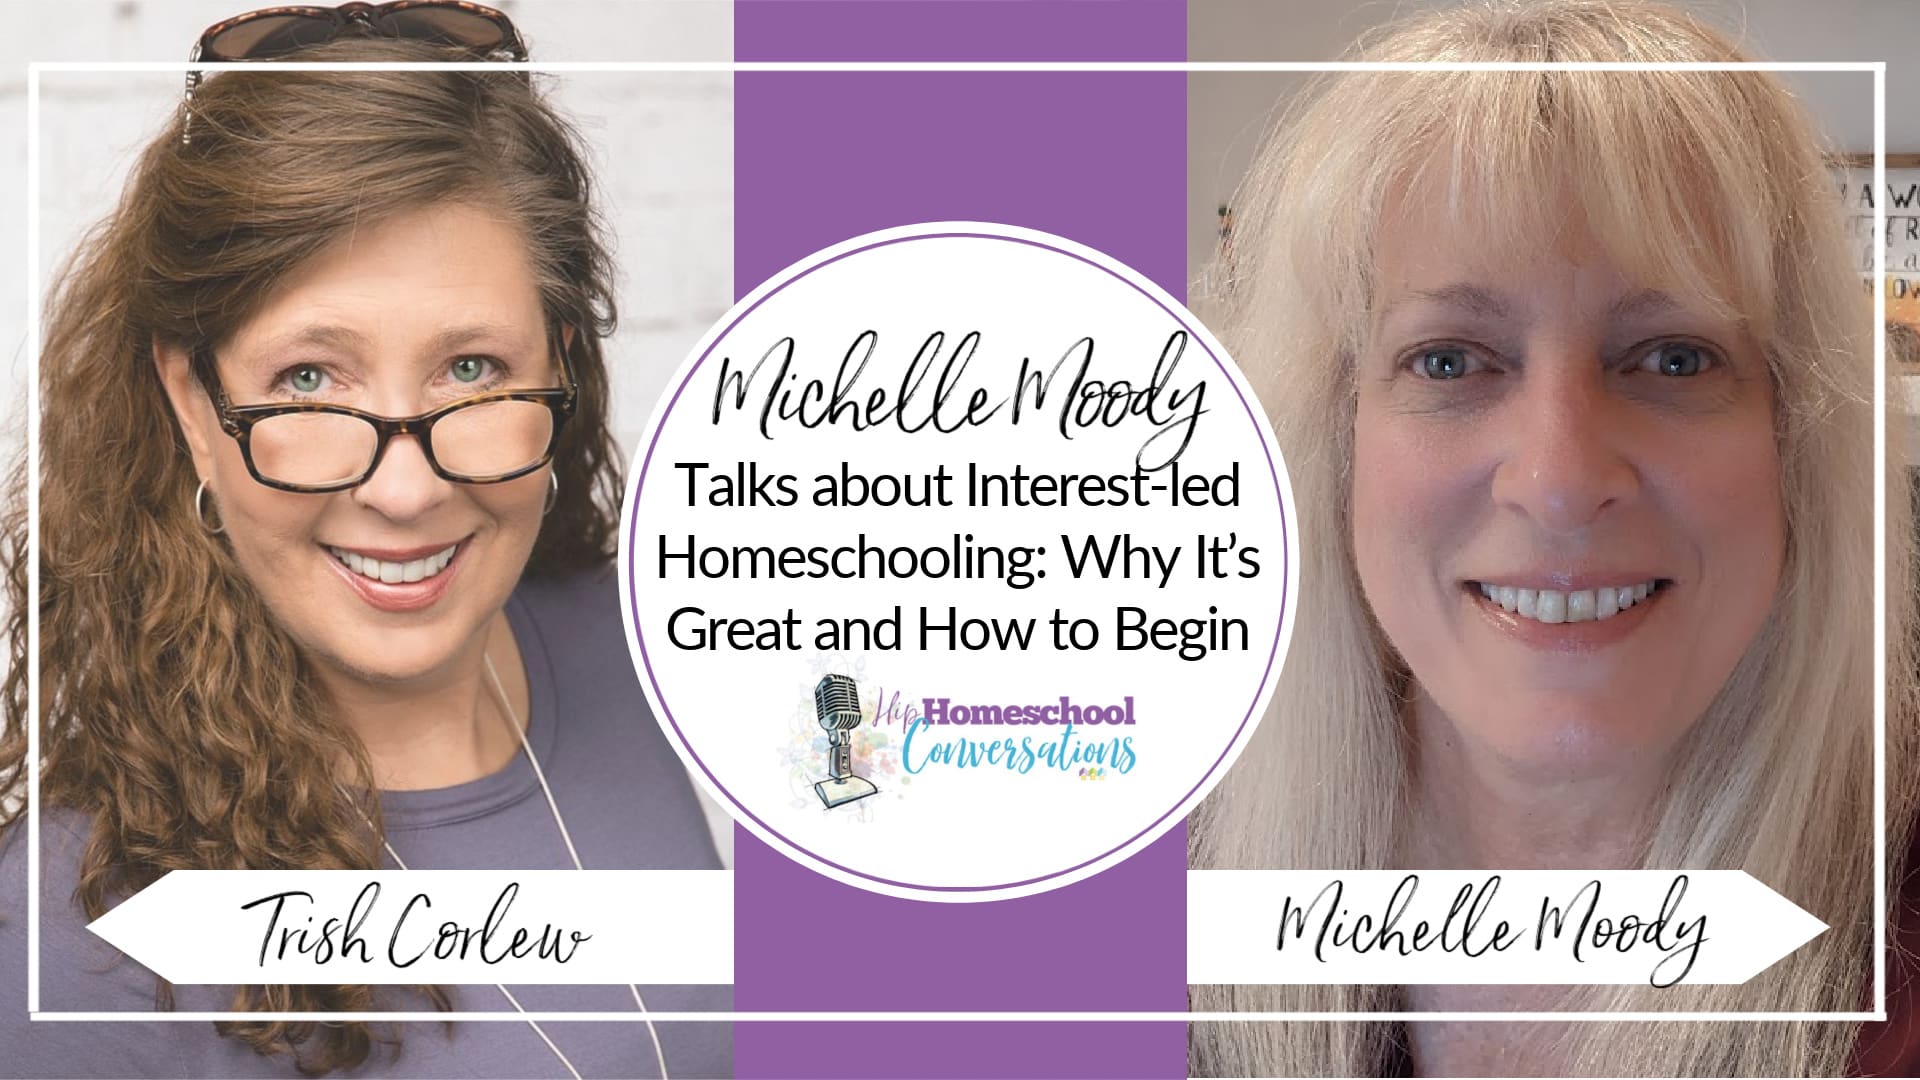 Michelle shares her journey from “boring her child to death” to interest-led learning that resulted in her kids taking more personal responsibility for their own education and developing a life-long love of learning.